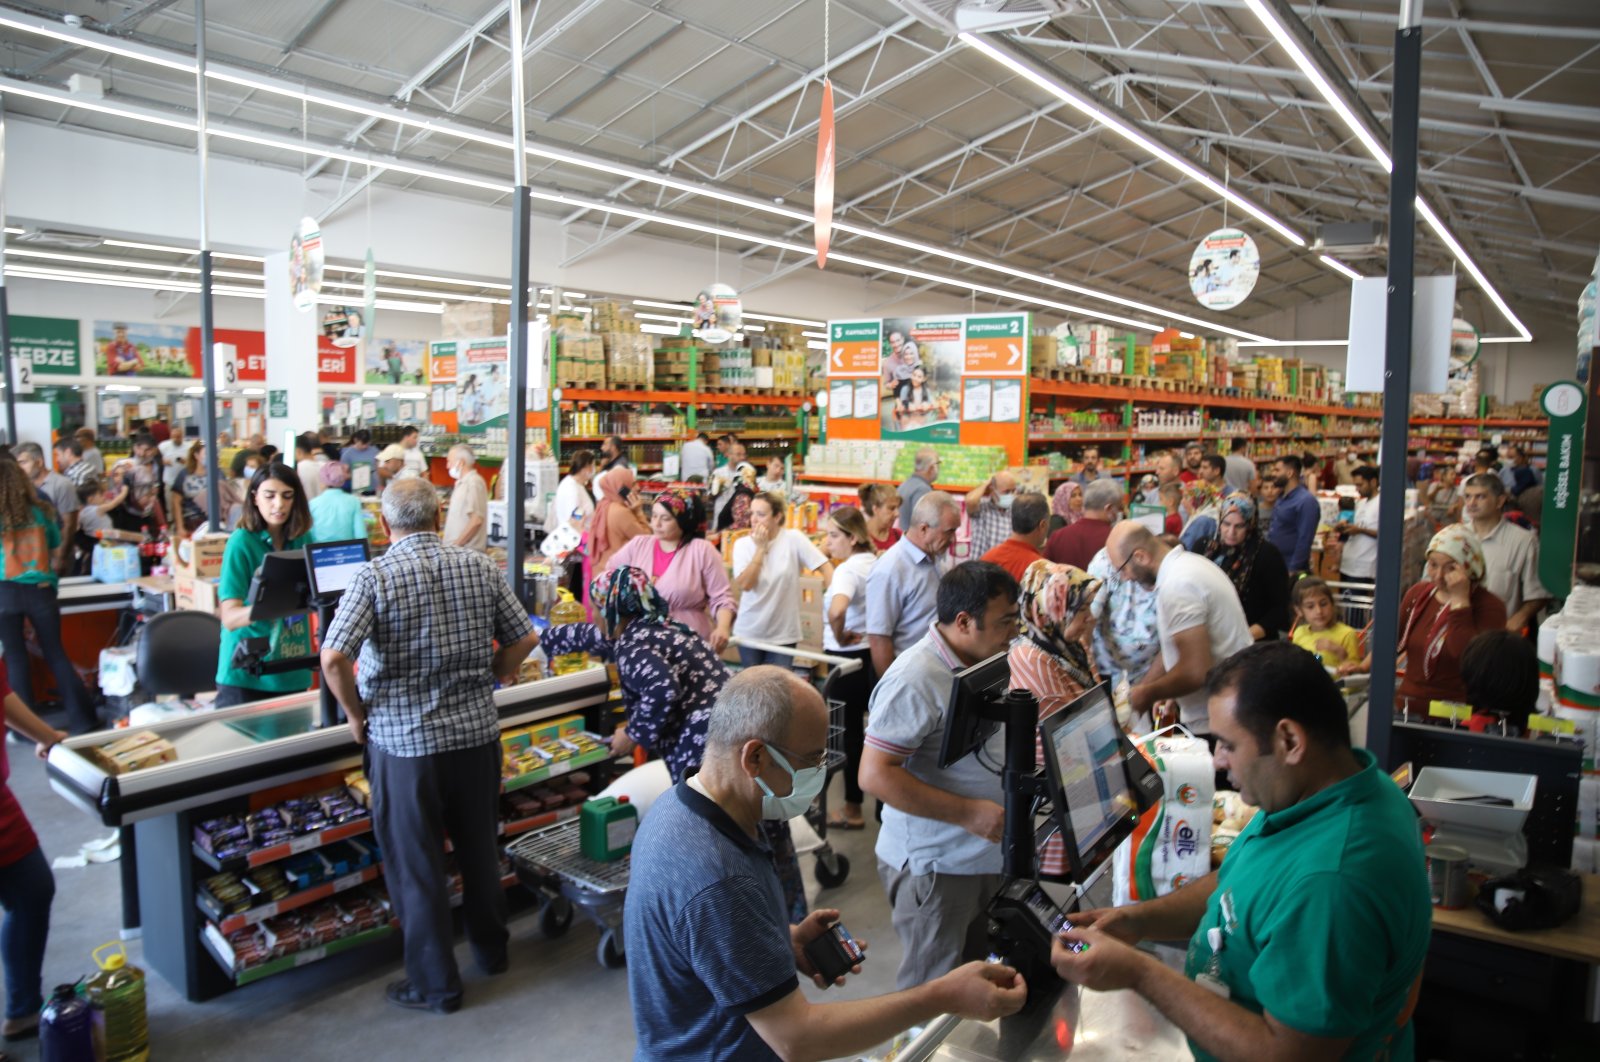 People shop at an agricultural credit cooperative outlet in Gaziantep province, southeastern Turkey, Aug. 15, 2022. (IHA Photo)